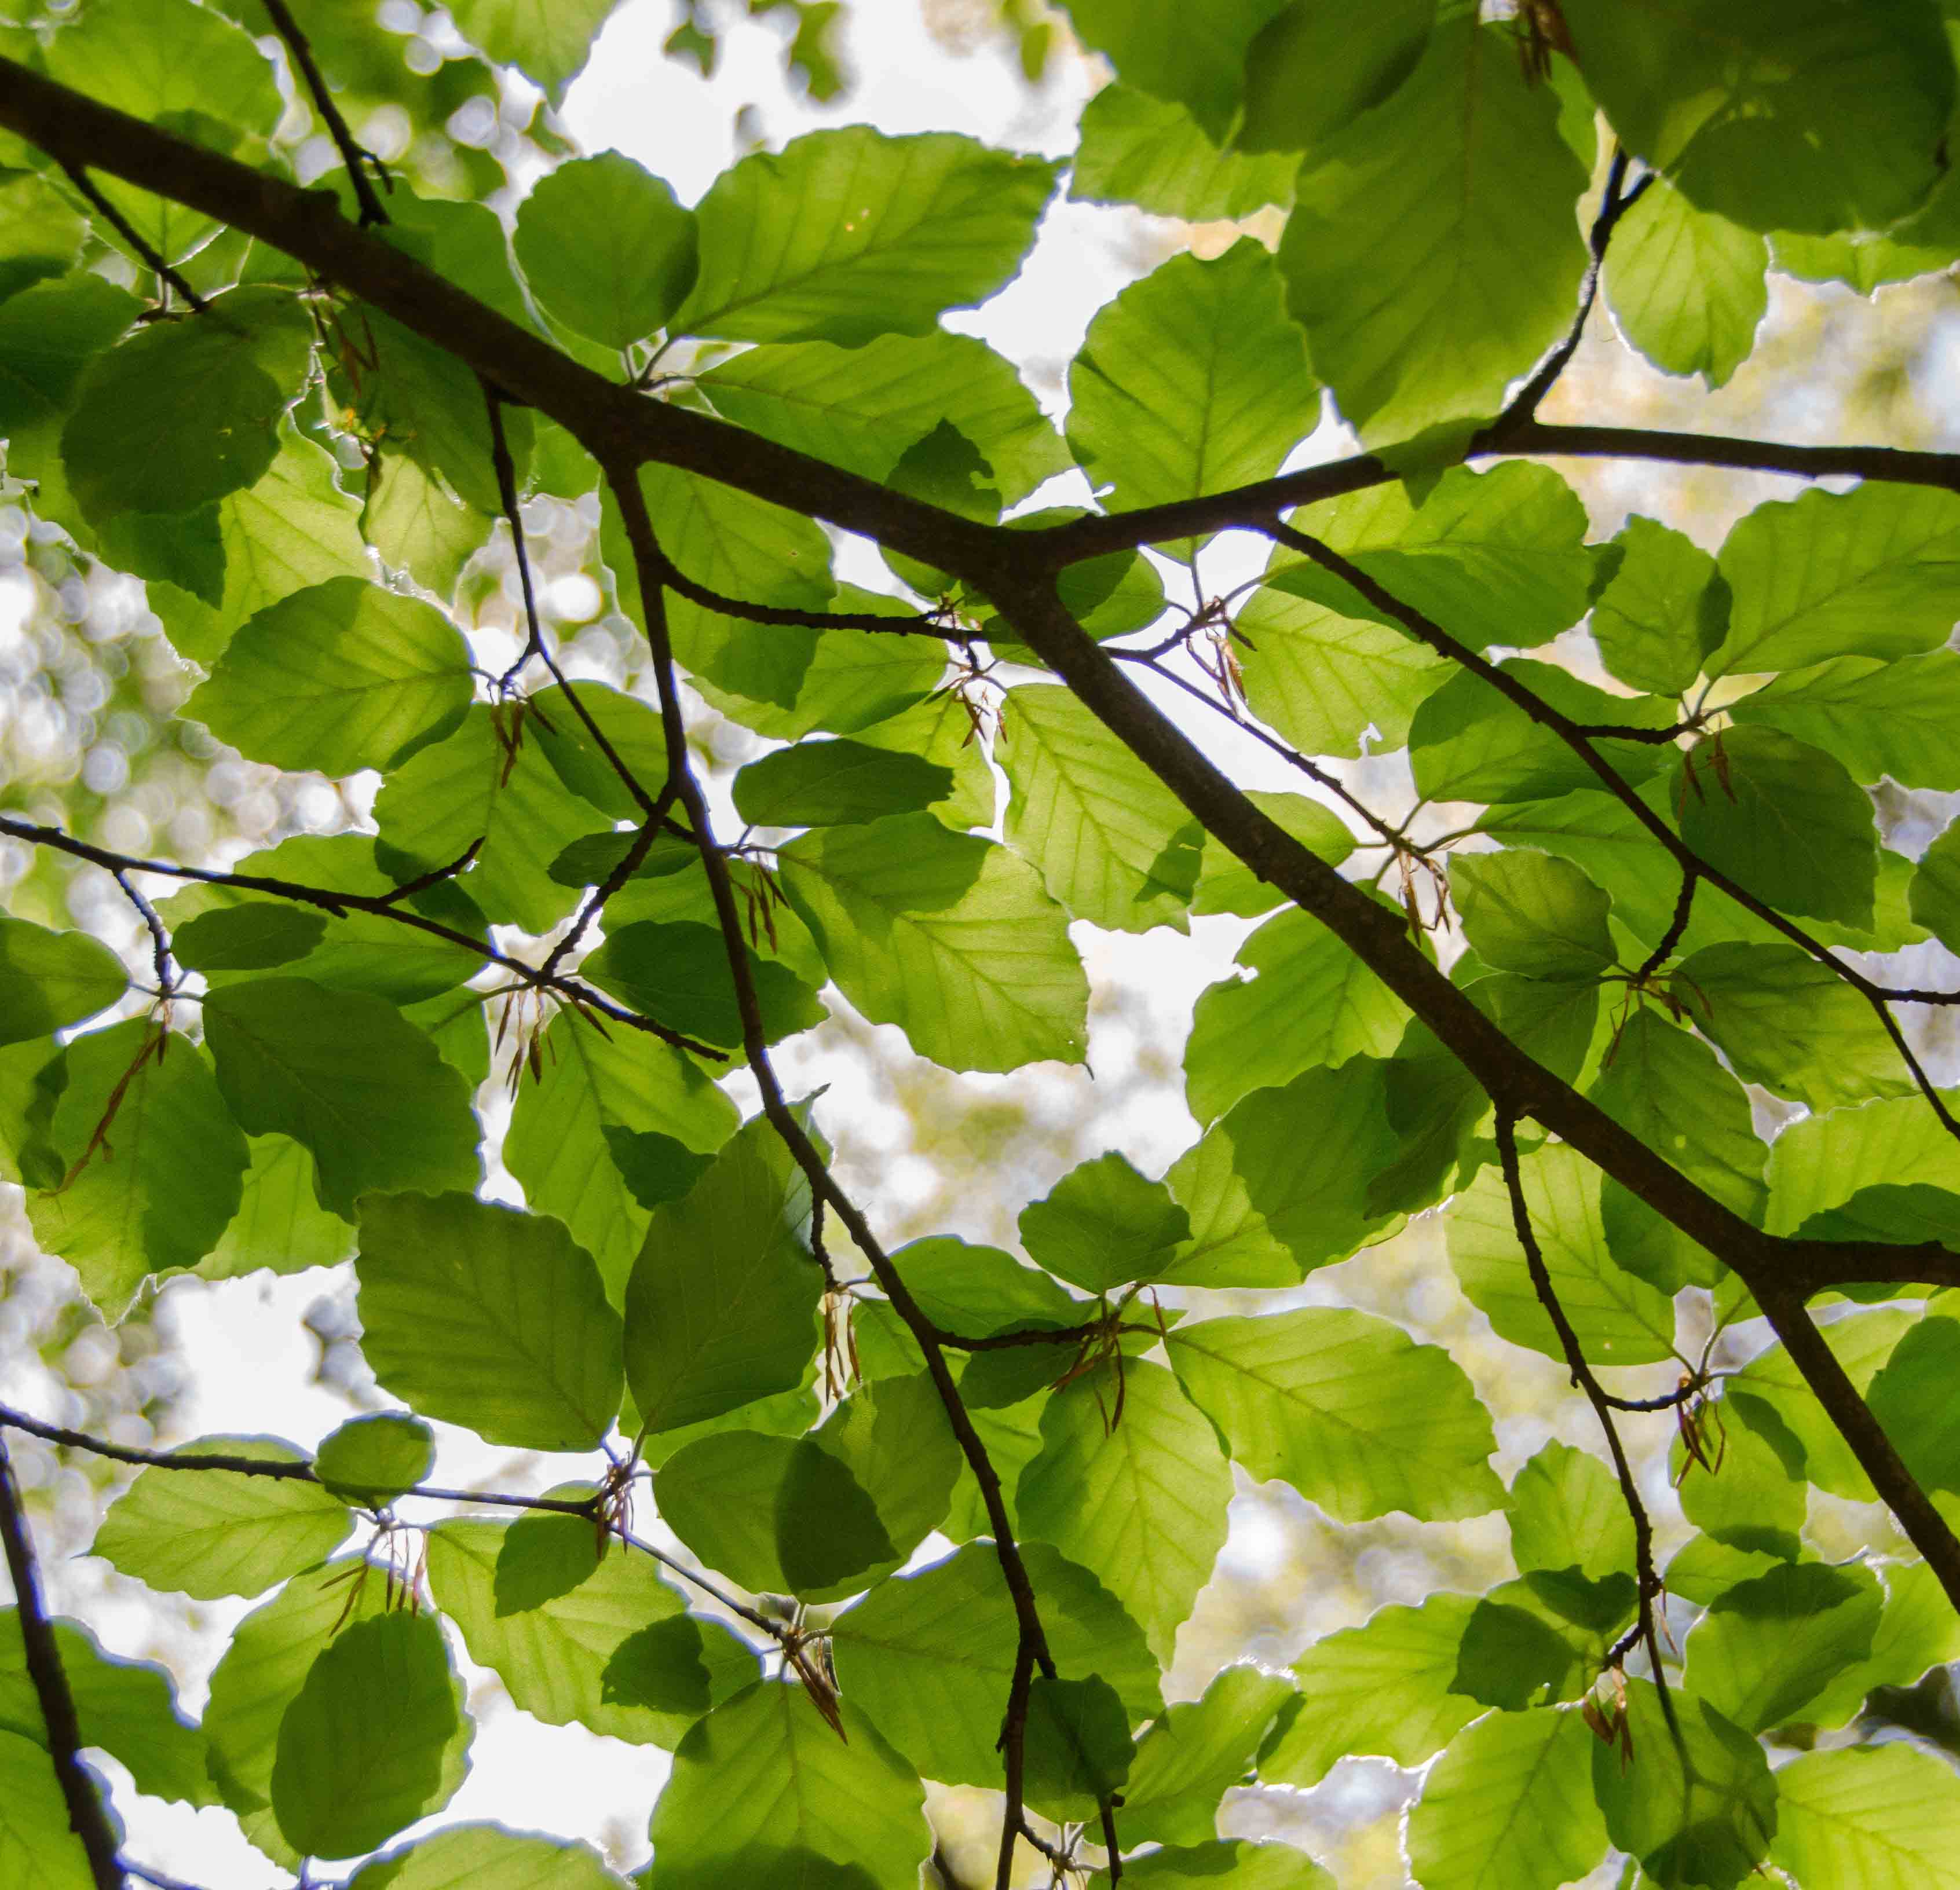 An image of tree branches and leaves